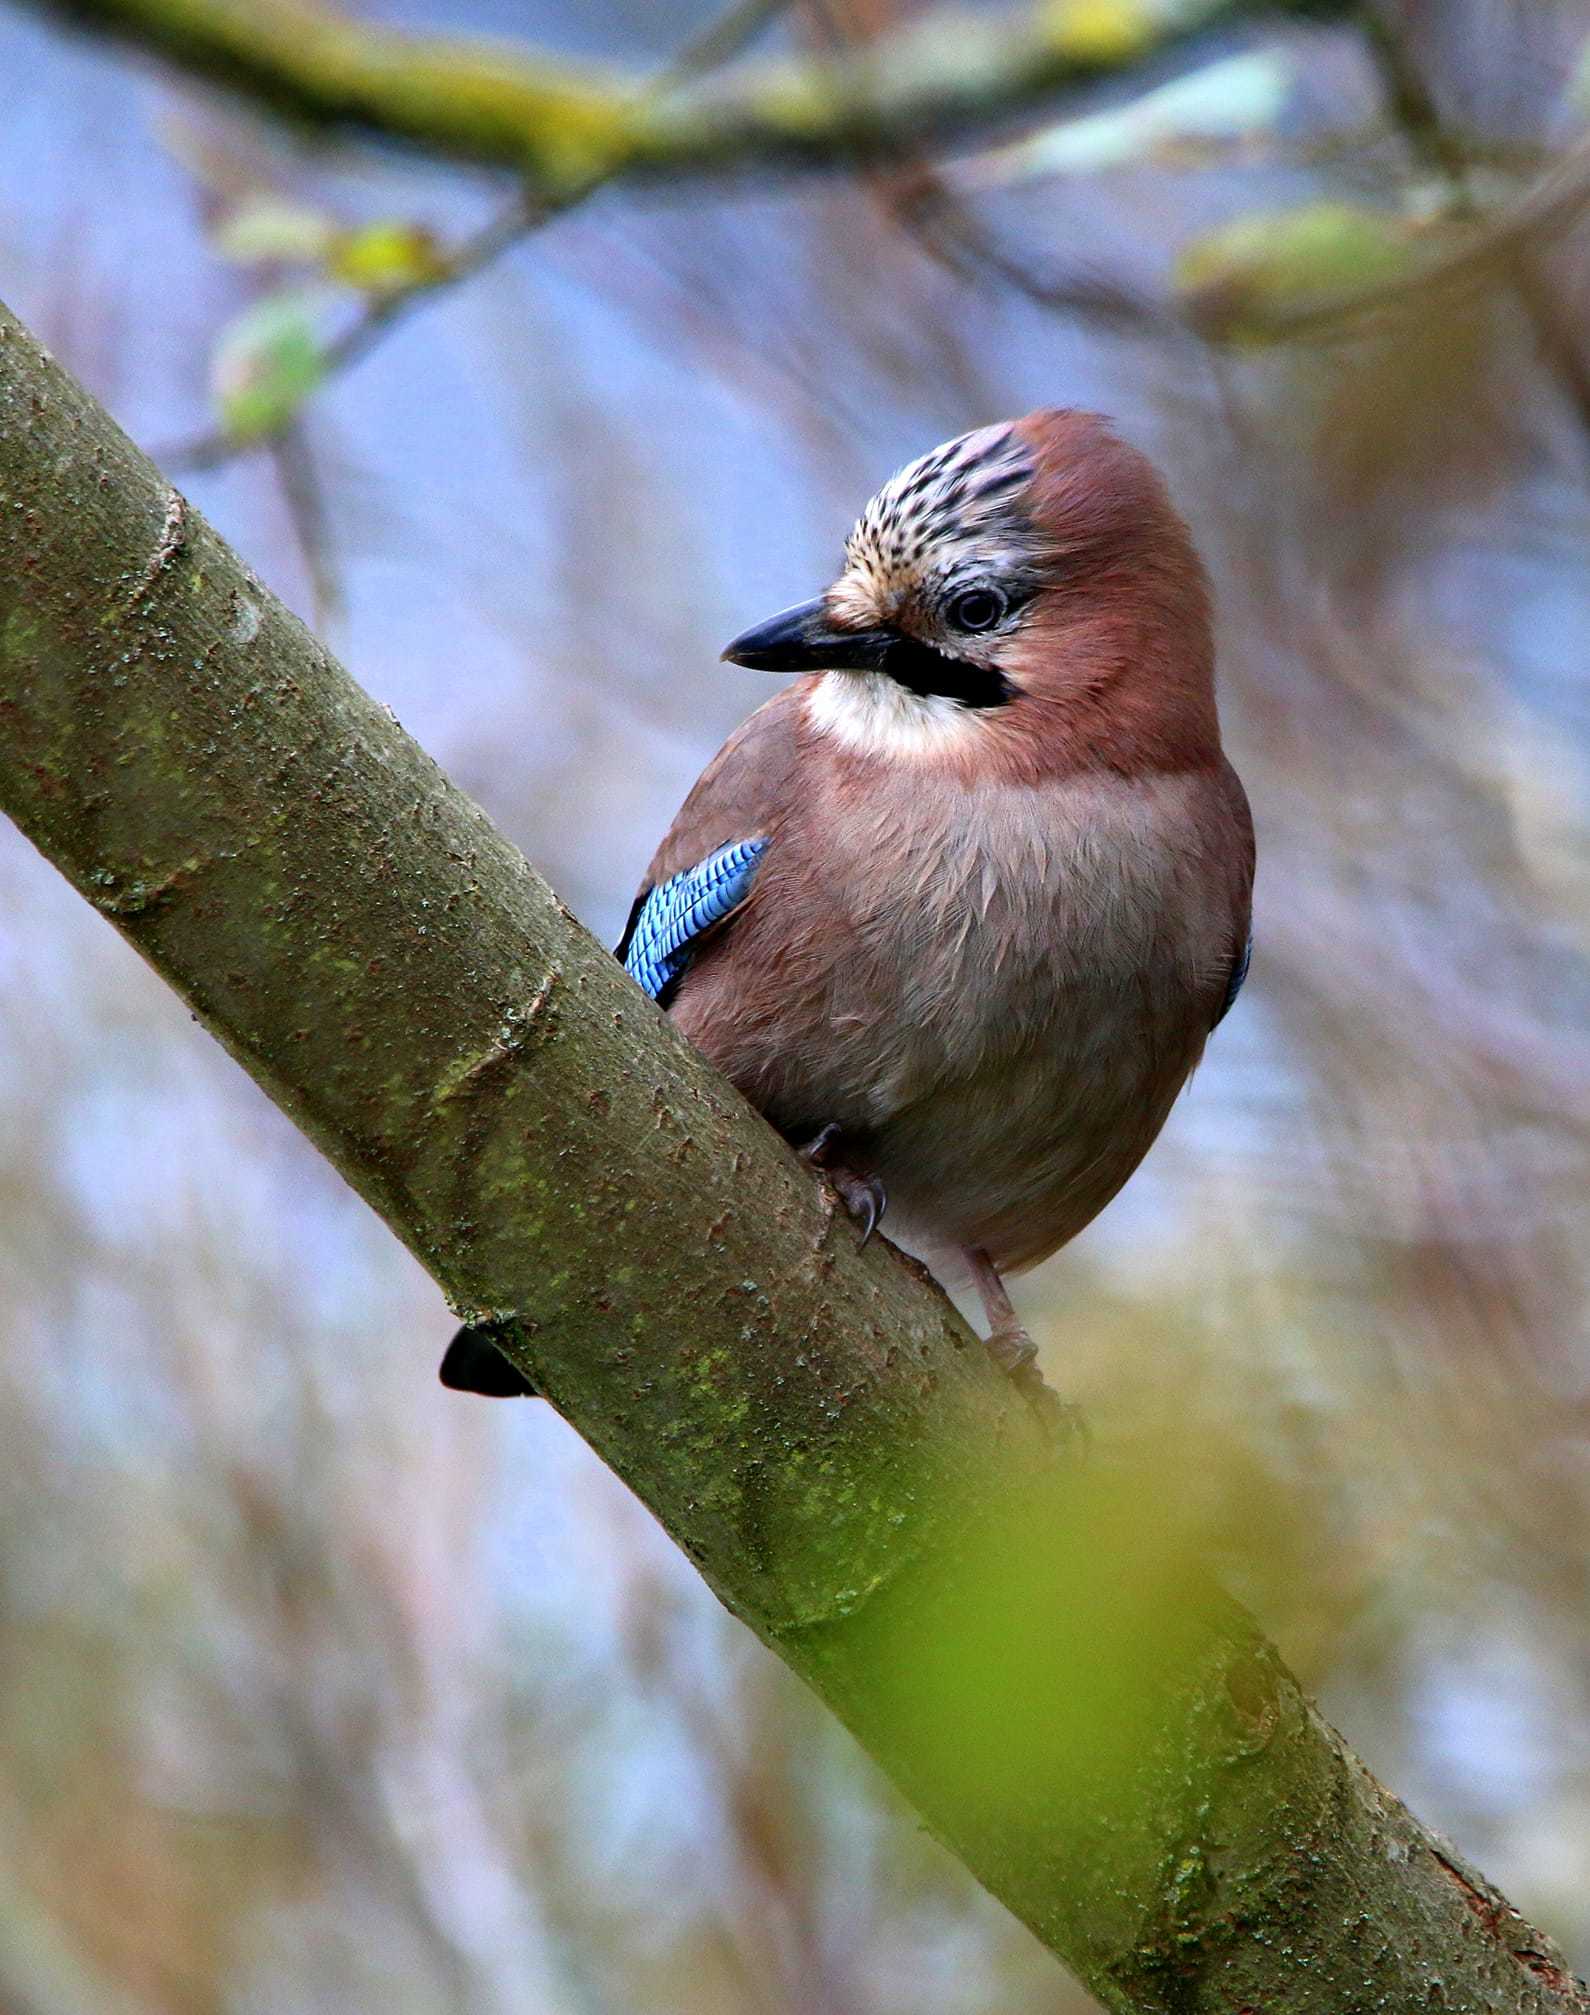 Juvenile jay taken at Low Barns Nature Reserve by Ian Carswell